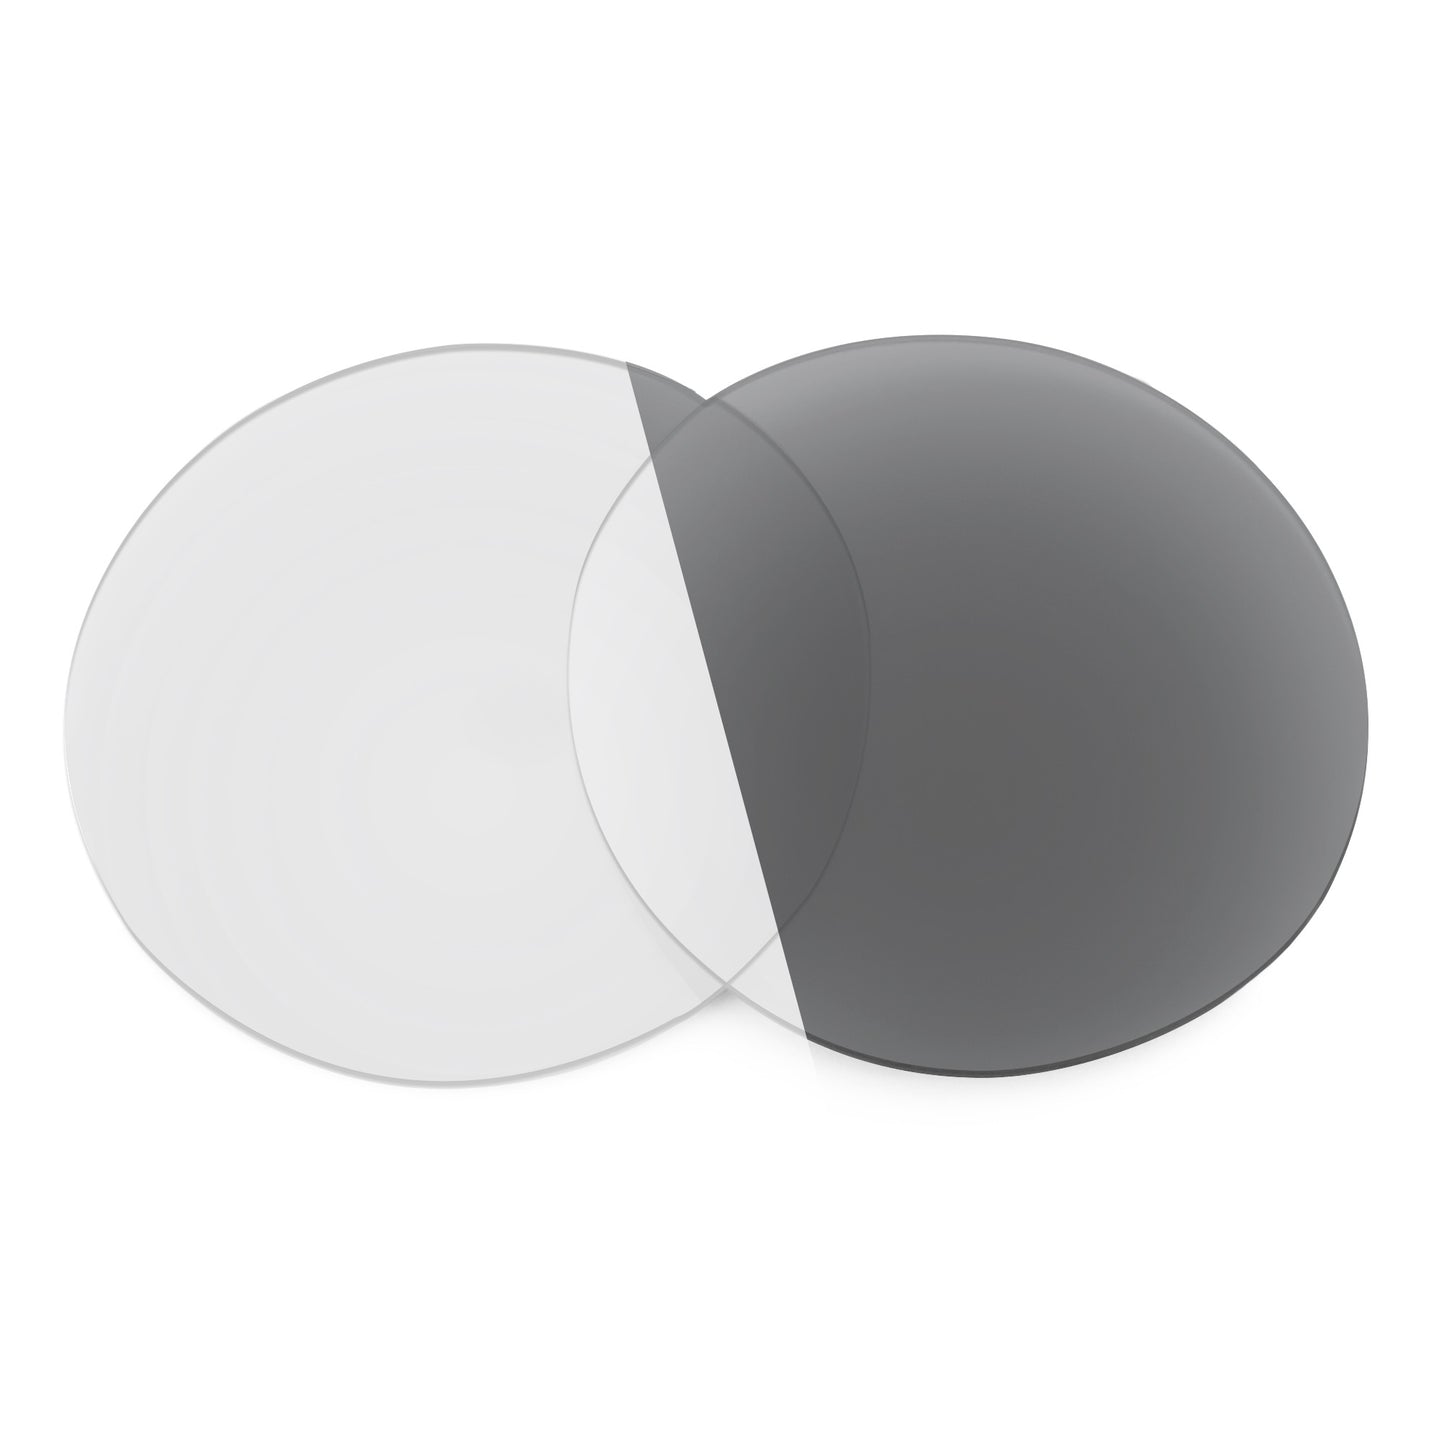 Revant replacement lenses for Ray-Ban Oval RB3547N 51mm Non-Polarized Adapt Gray Photochromic